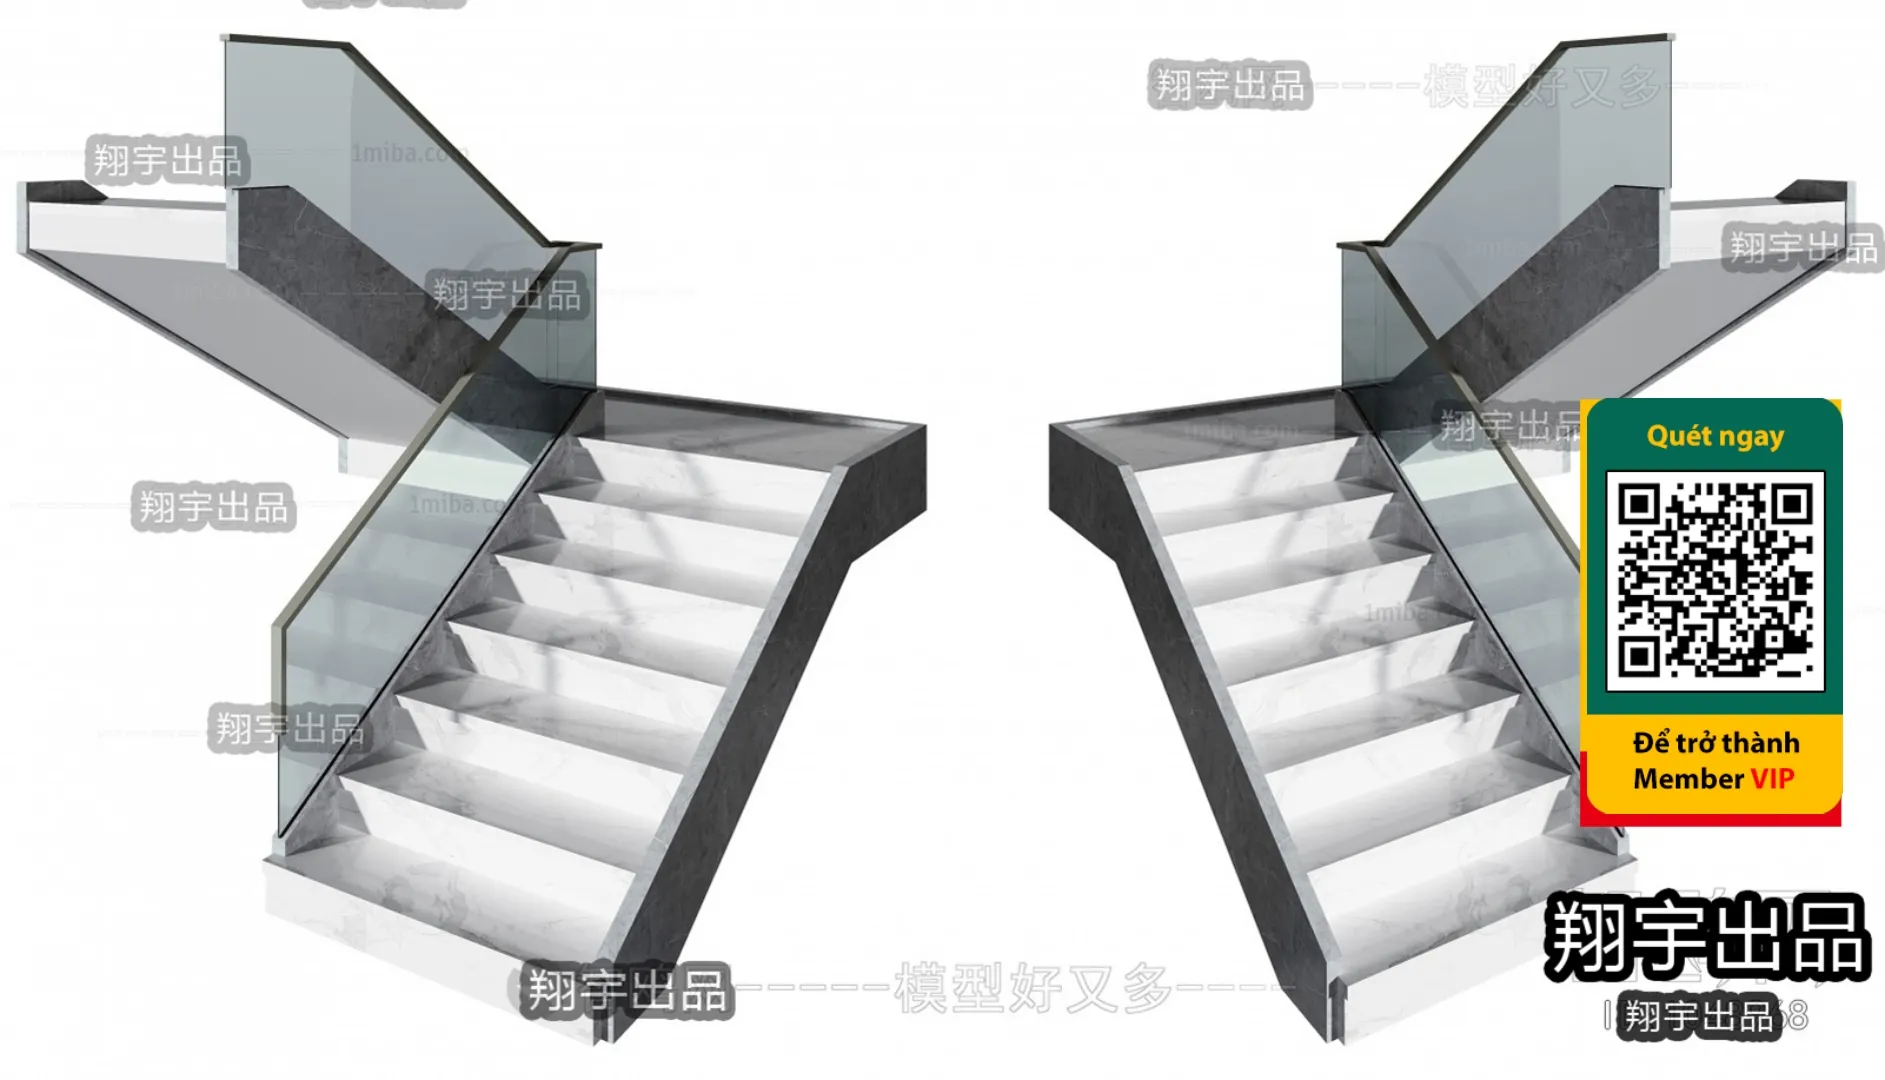 3DS MAX – STAIR – VRAY / CORONA – 3D MODEL – 4519